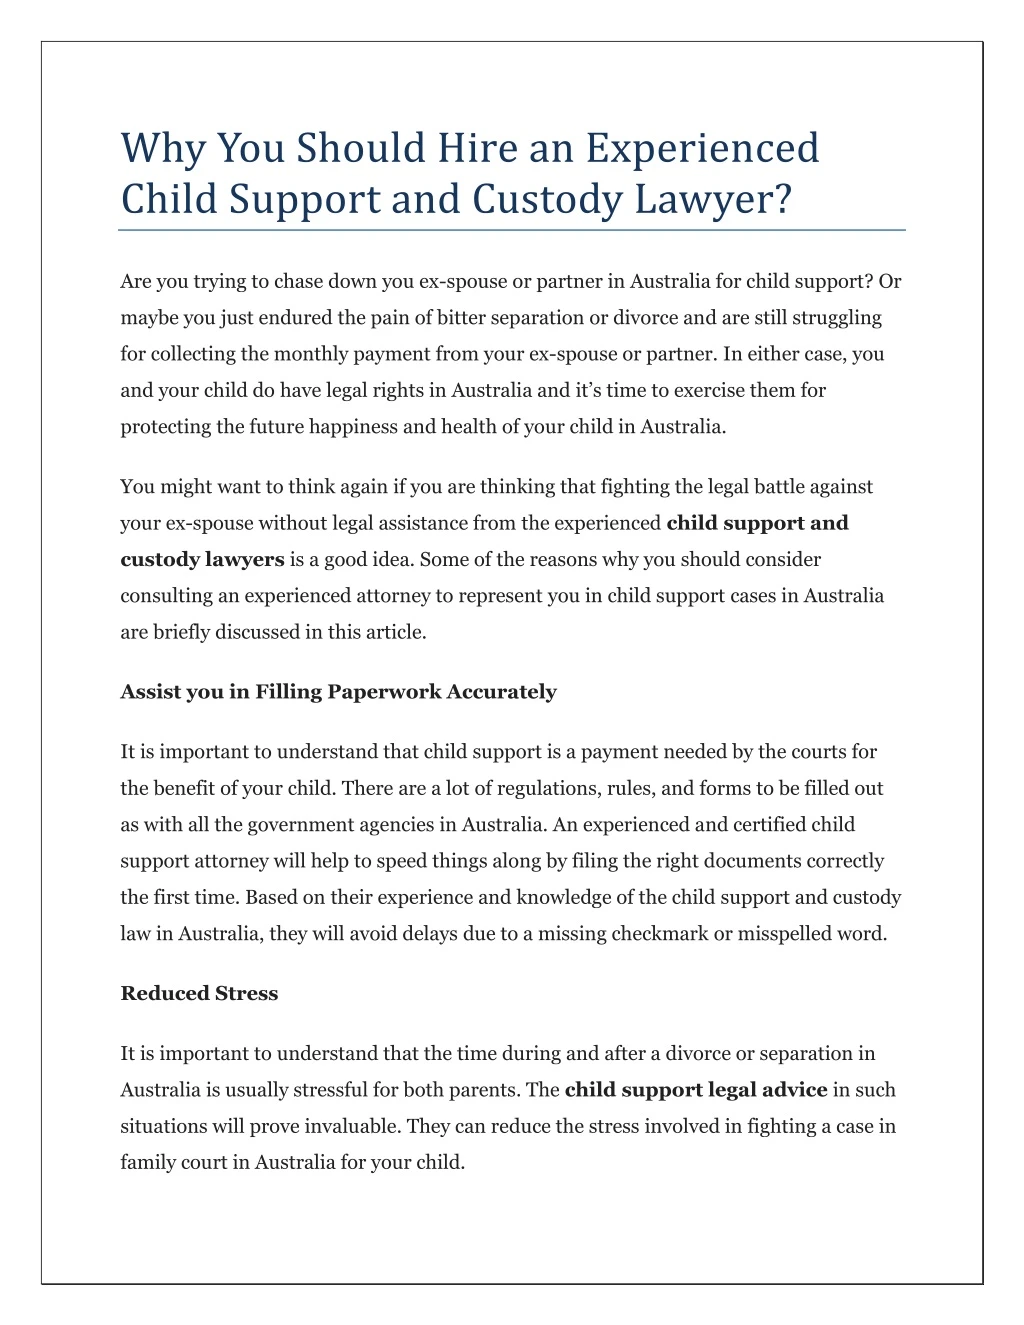 why you should hire an experienced child support